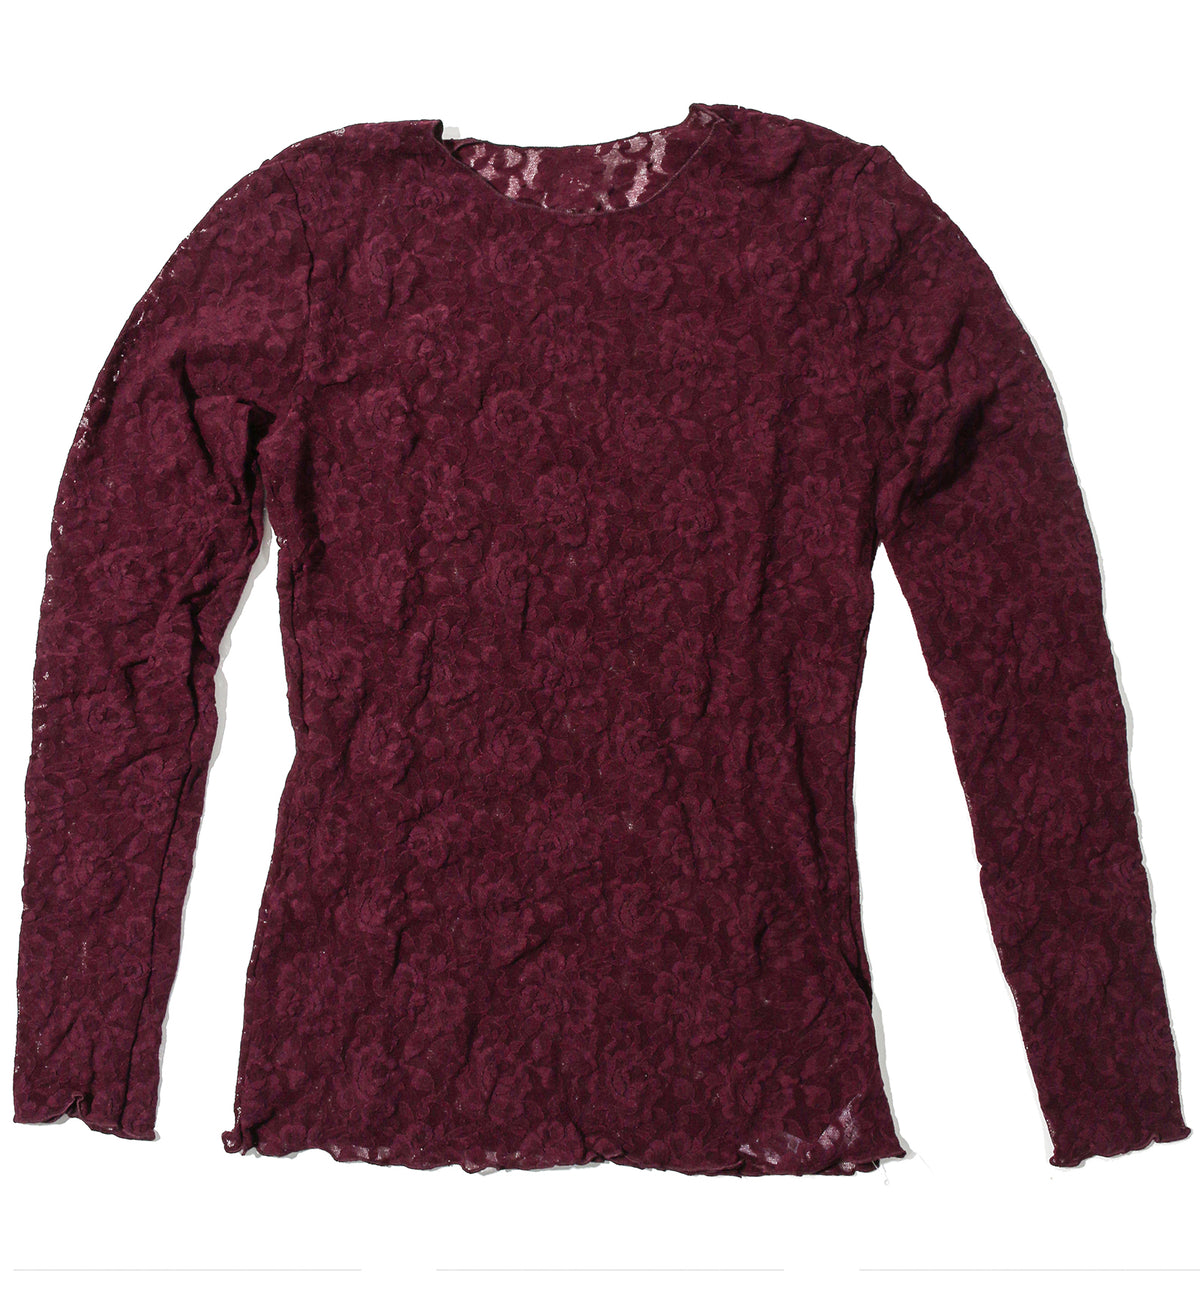 Hanky Panky Signature Lace Unlined Long Sleeve Top (128L),Large,Dried Cherry - Dried Cherry,Large